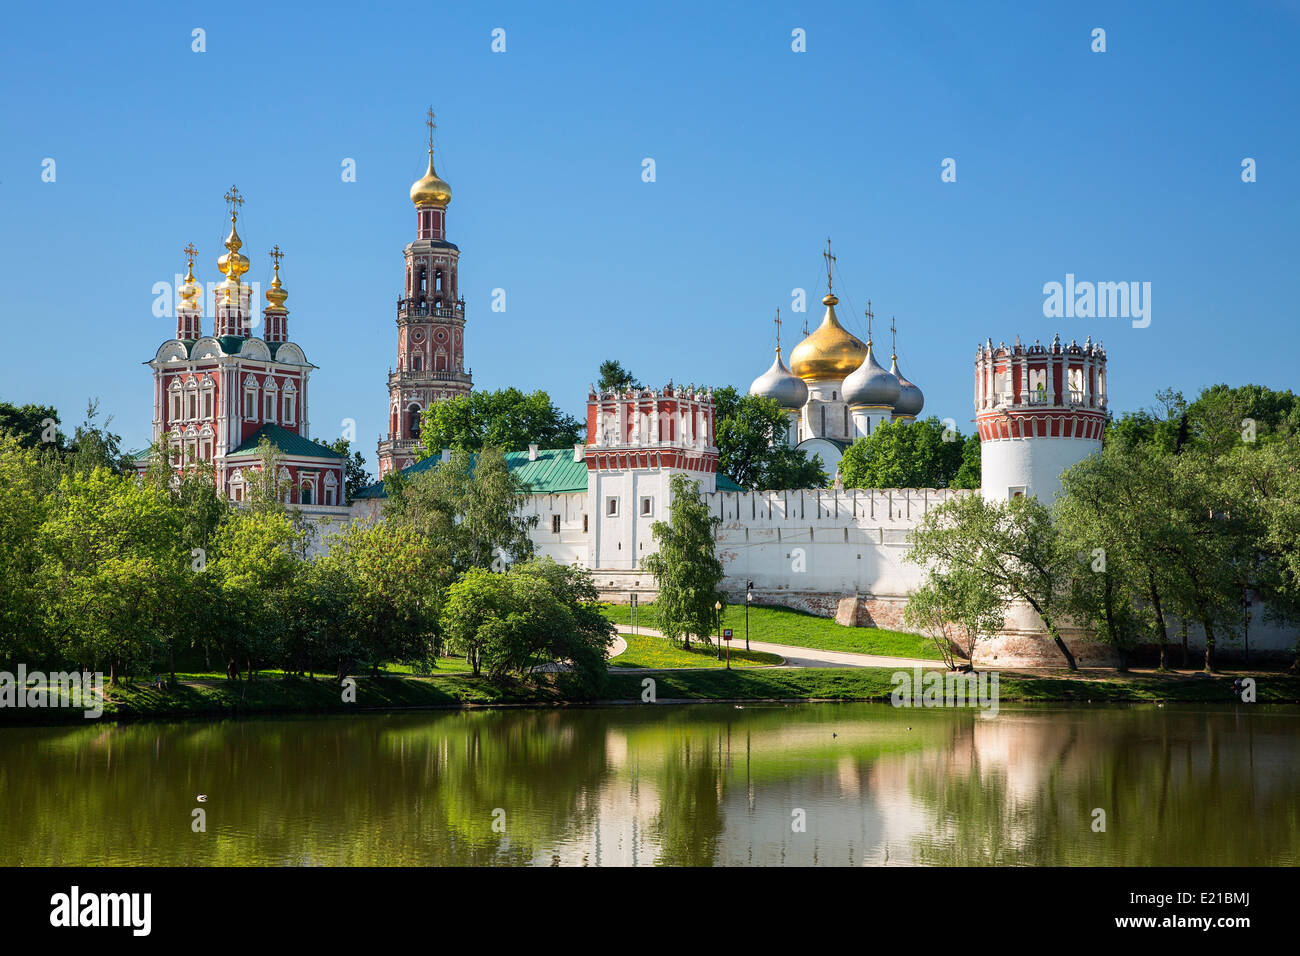 Russia, Moscow Oblast, Novodevichy Convent Stock Photo